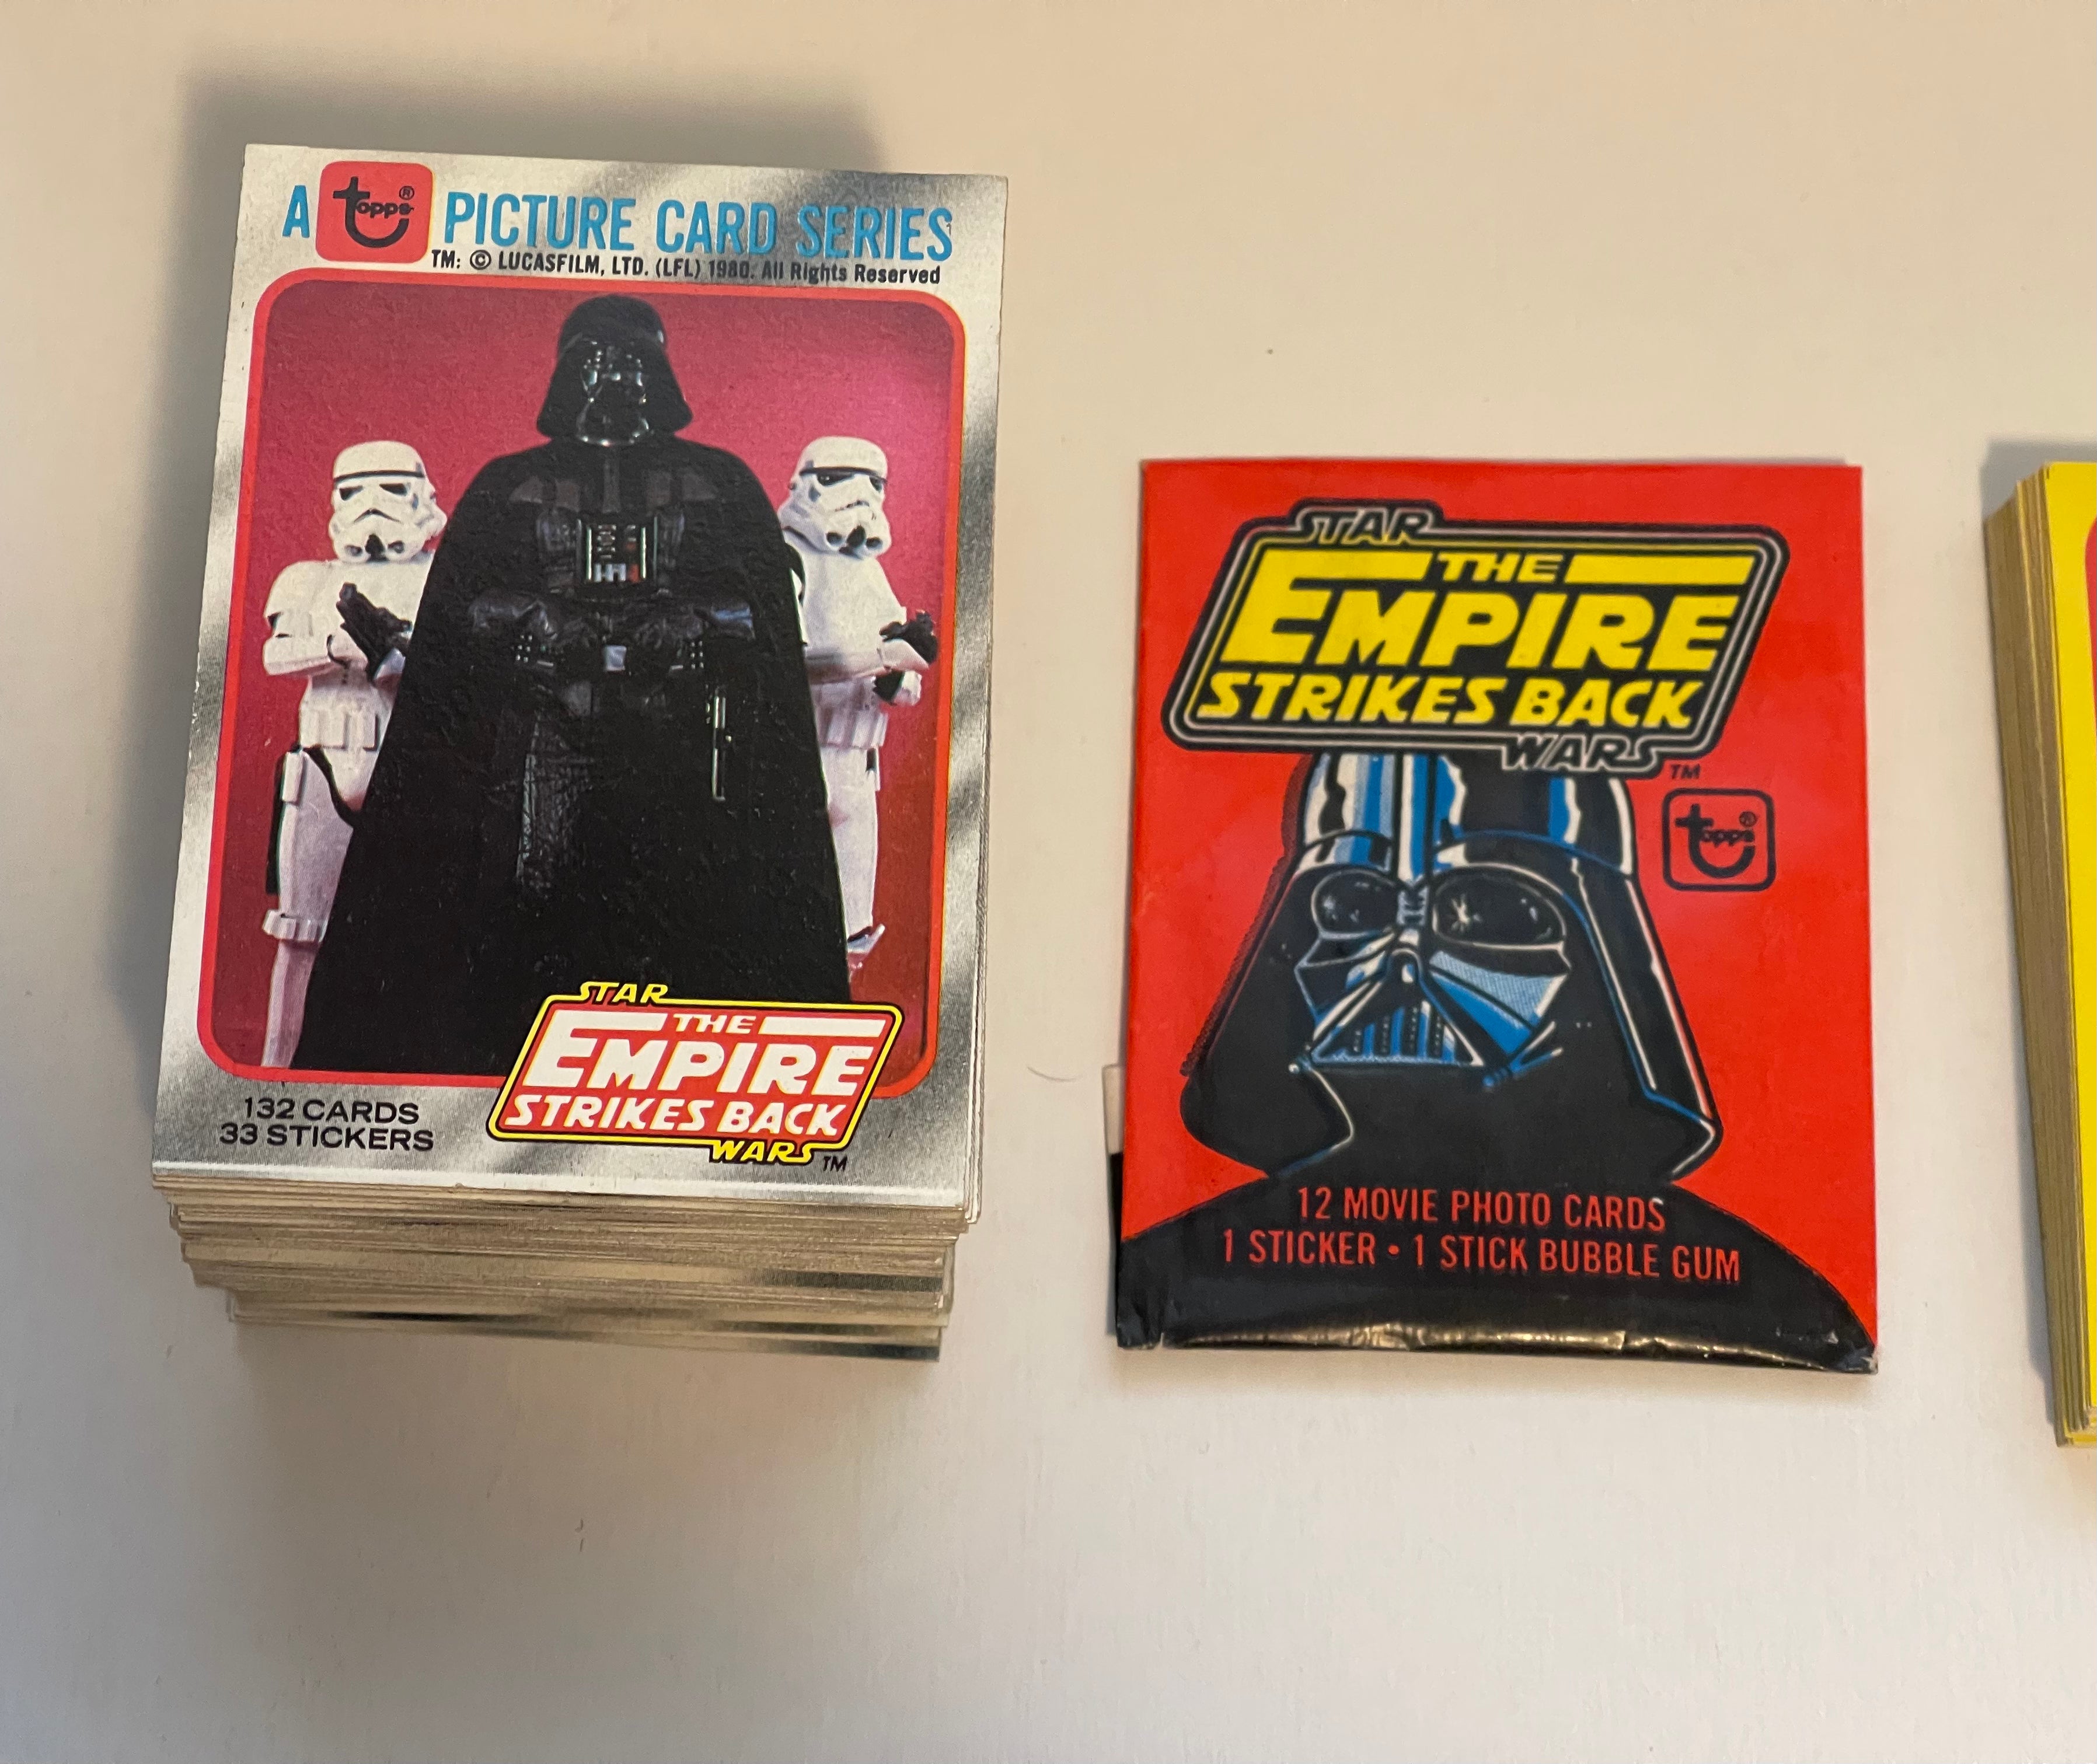 Empire Strikes Back series 1 rare cards and stickers high grade condition cards set 1980